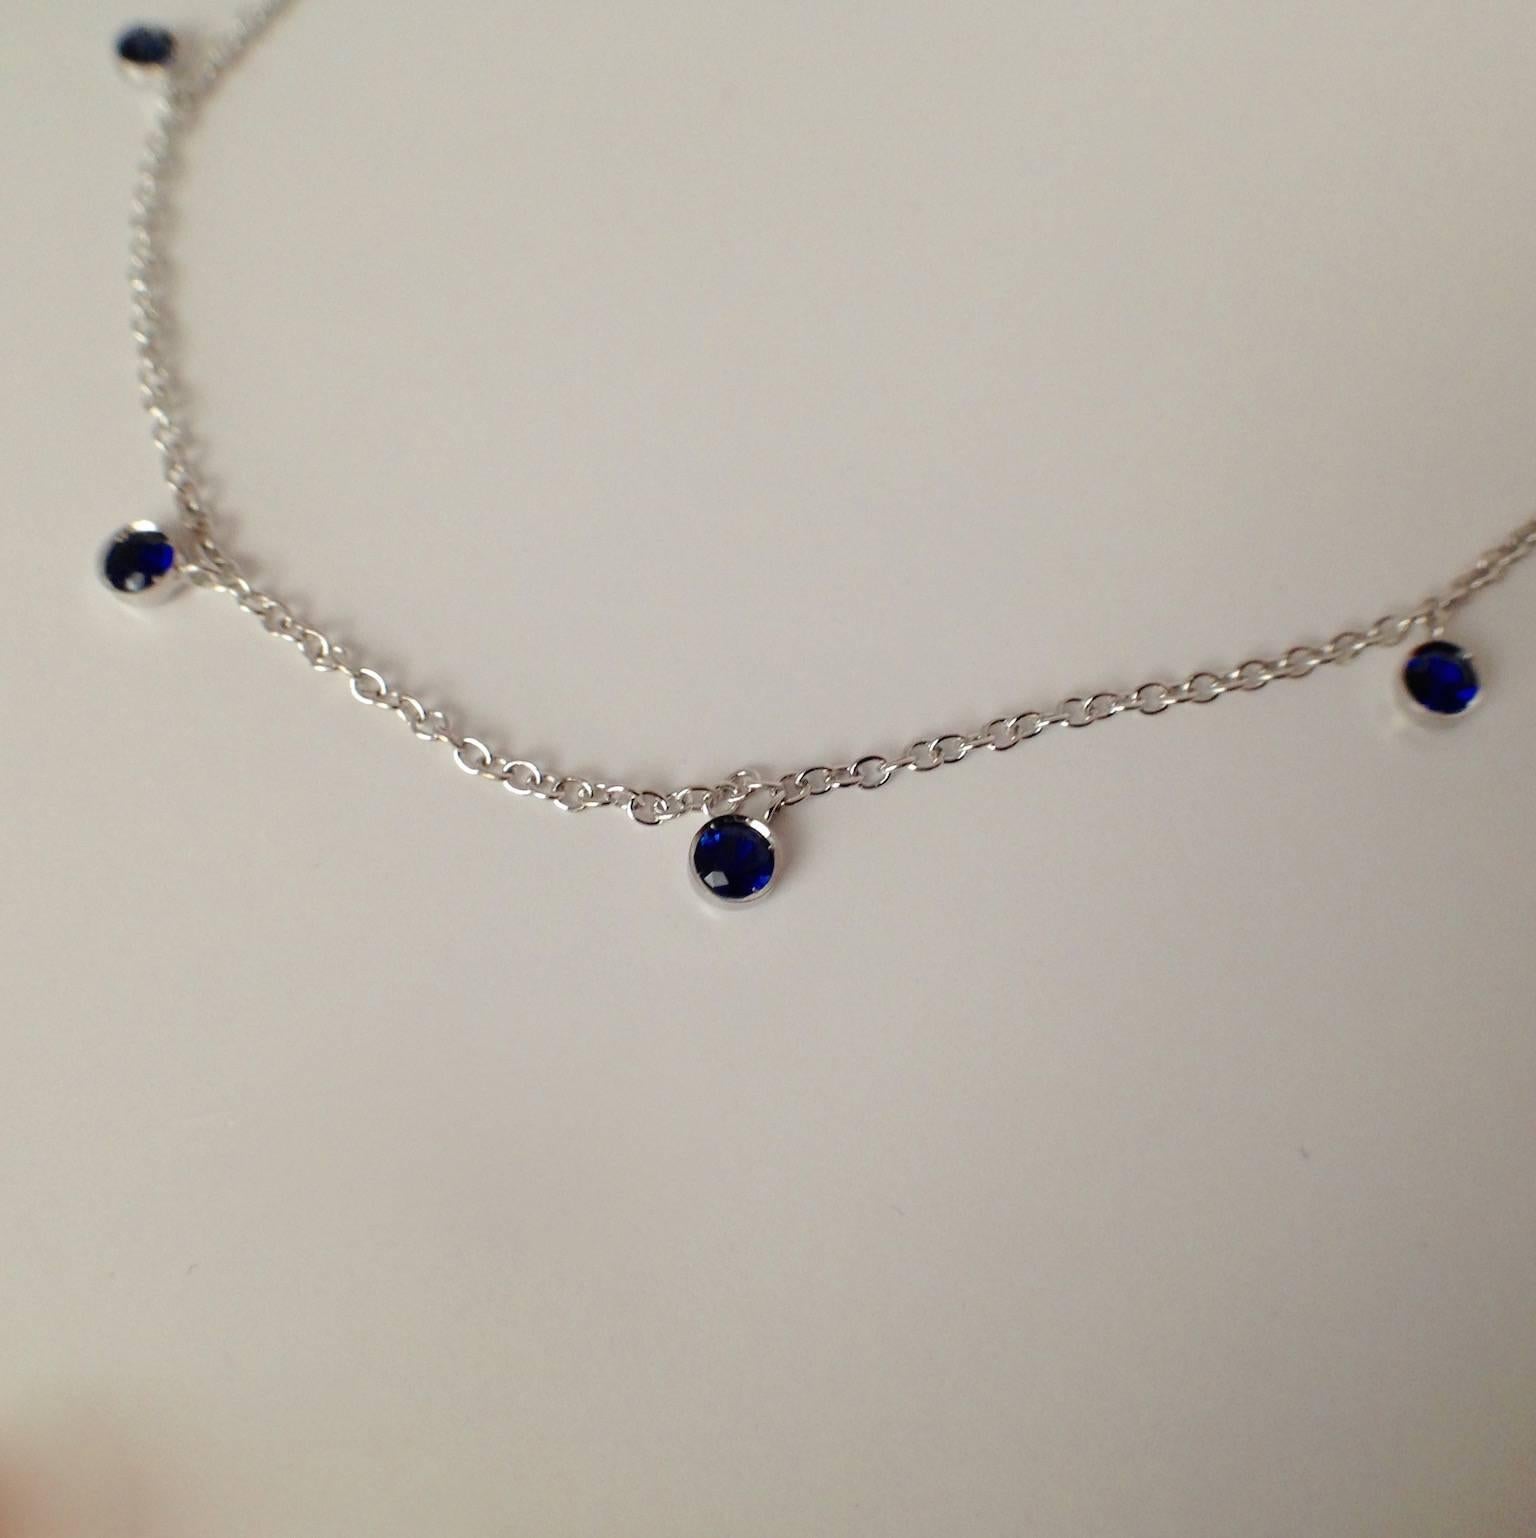 Women's Petronilla Blue Sapphire 18 Karat White Gold Necklace Made in Italy